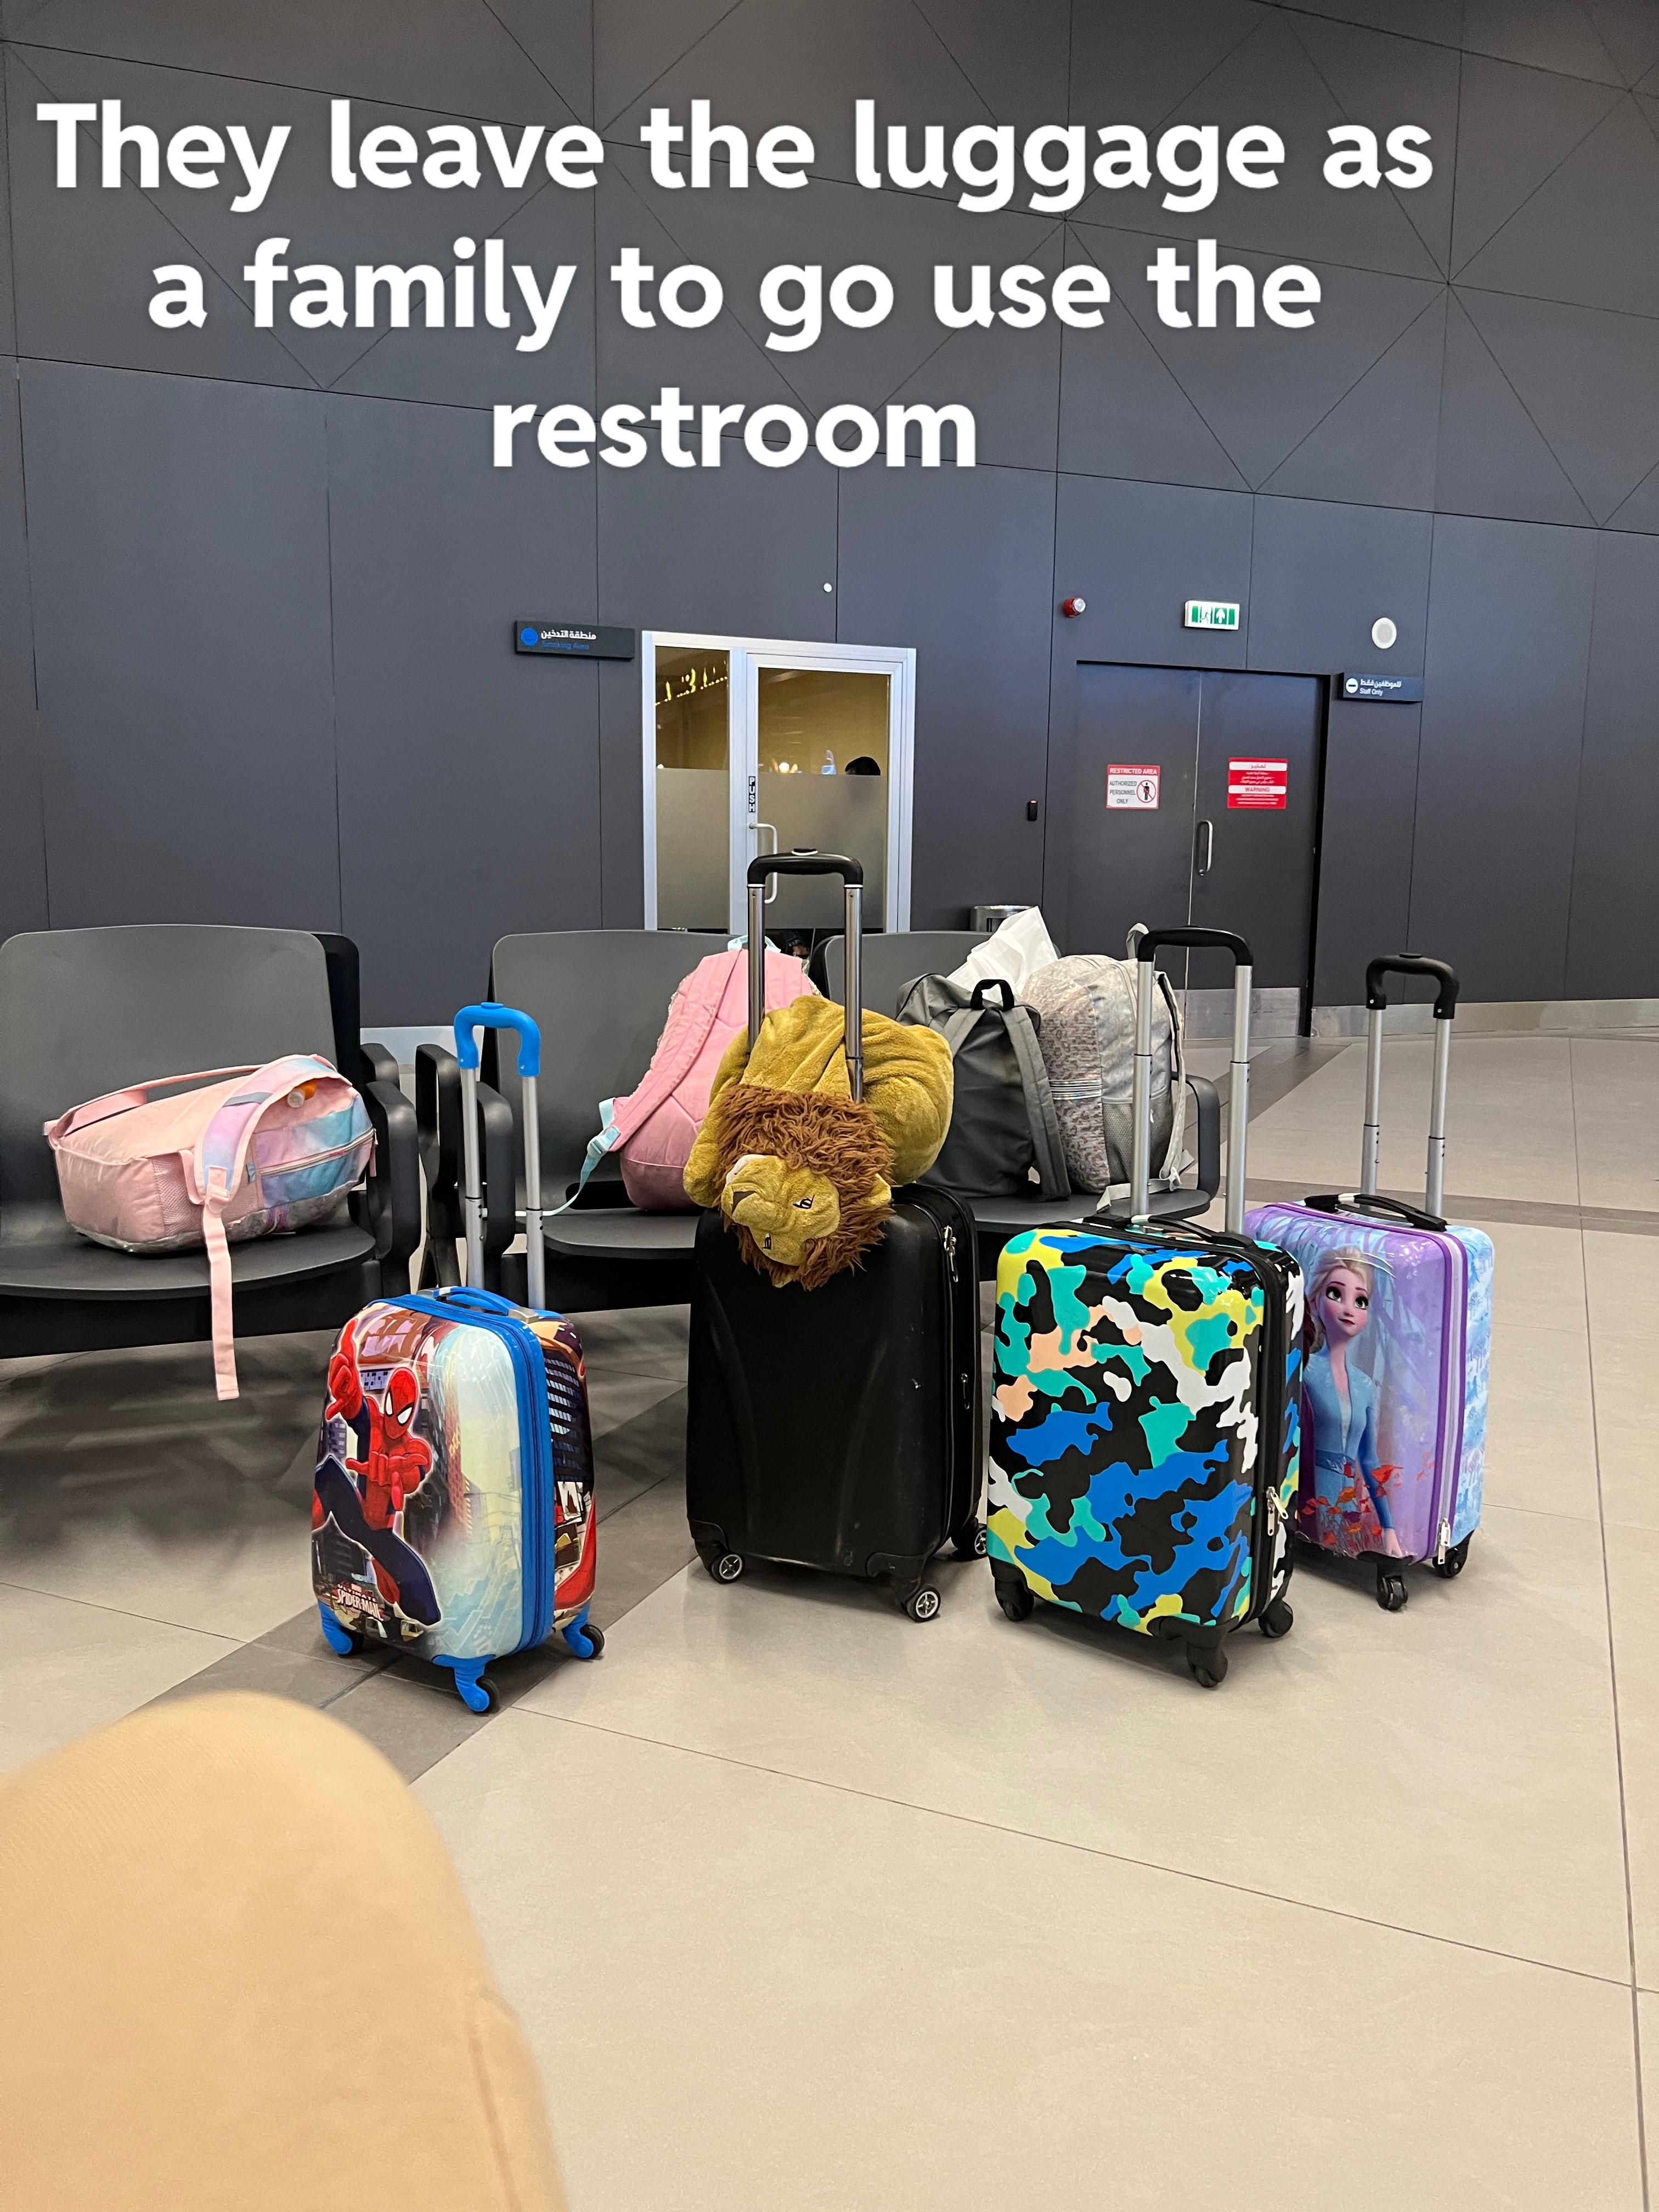 Literally signs everywhere in the airport to not leave luggage unattended.